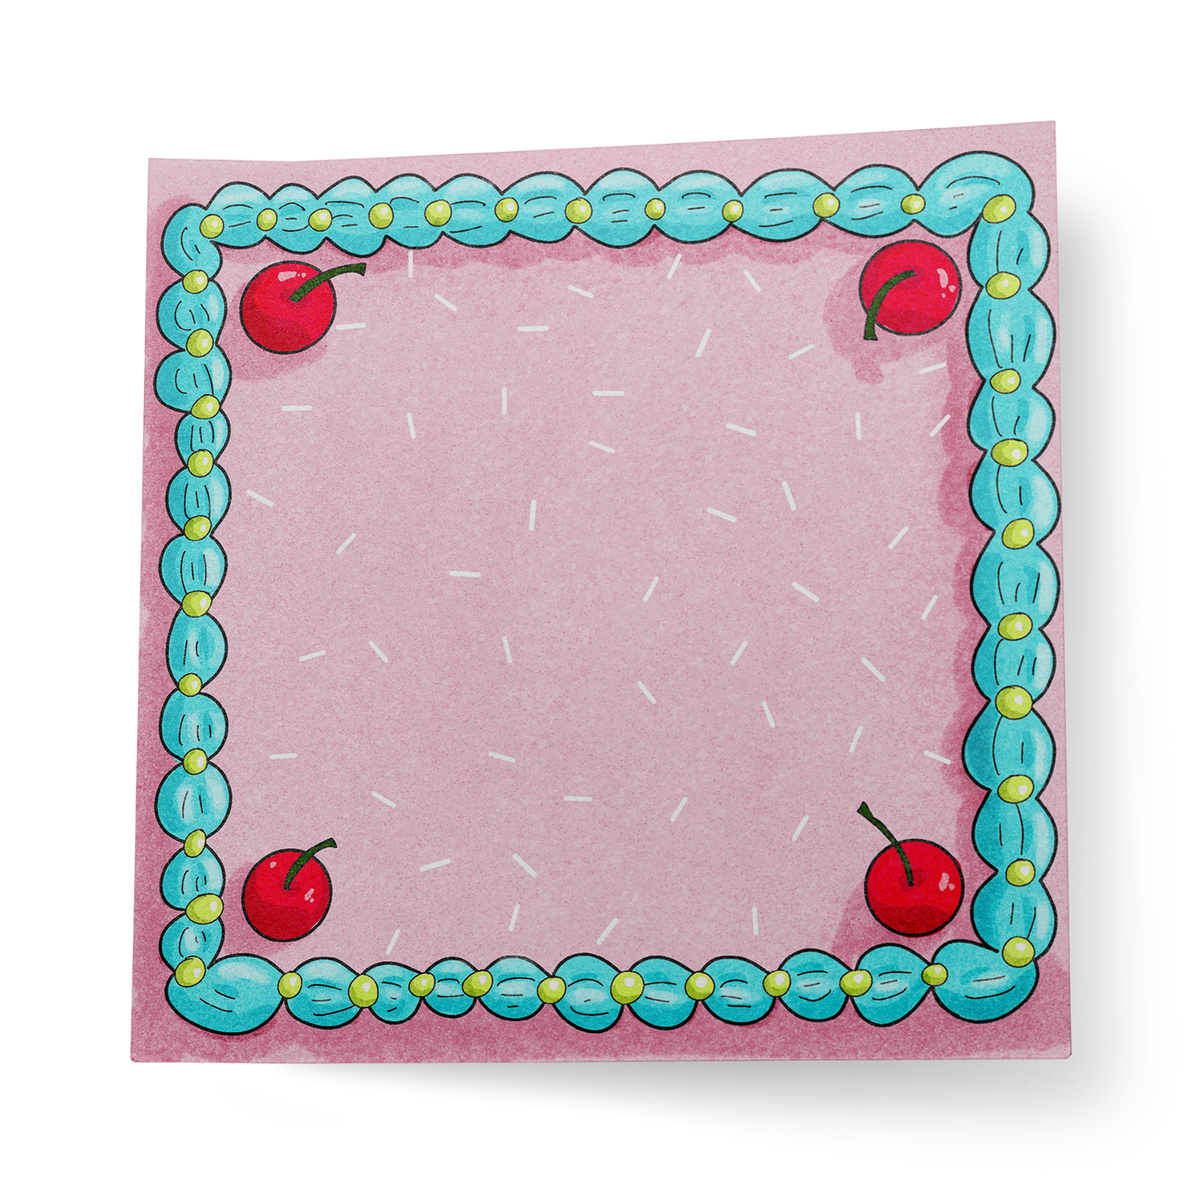 A sticky note that looks like a cake with cherries